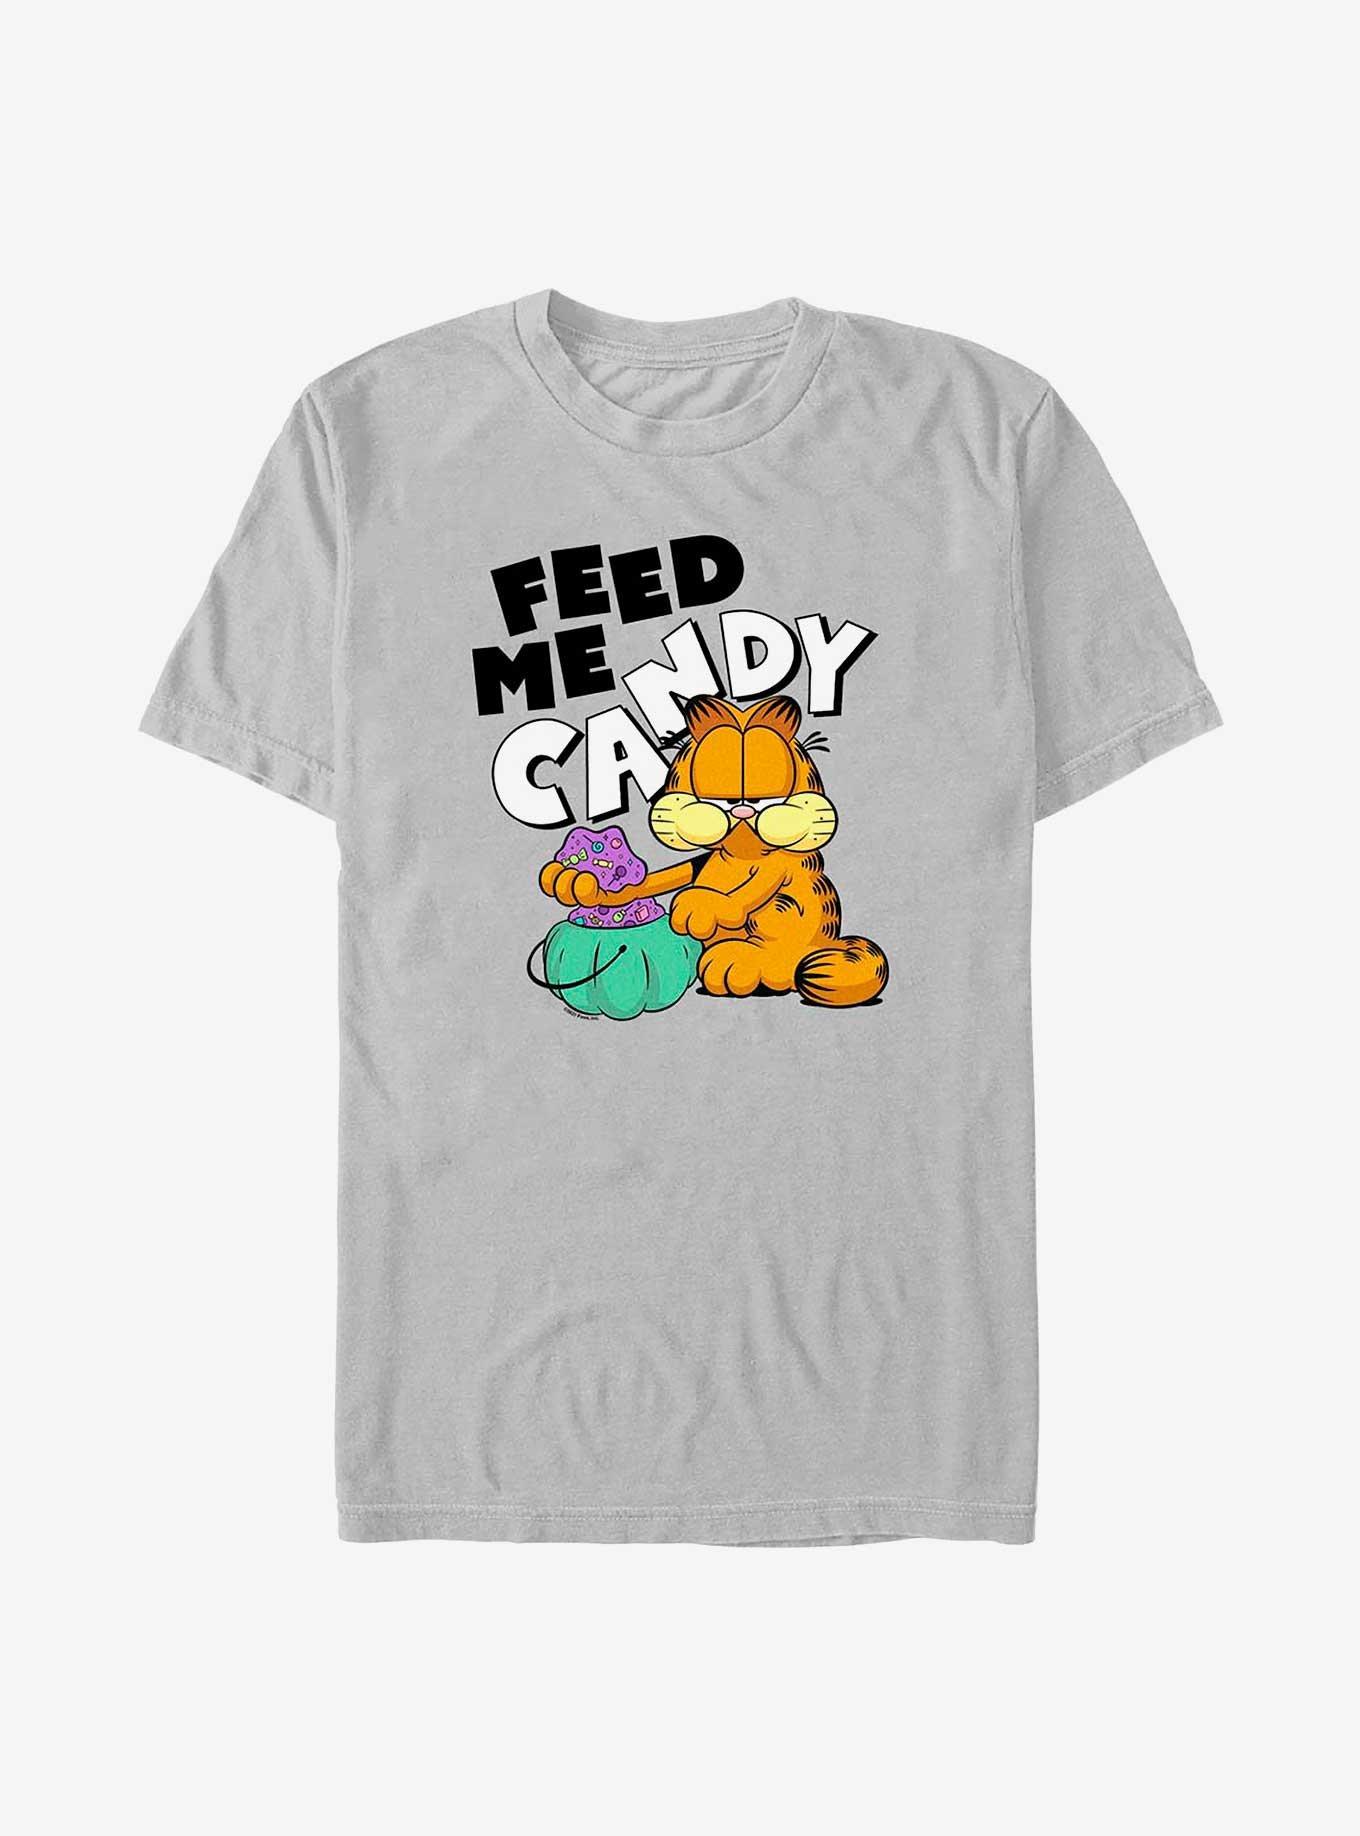 Garfield Feed Me Candy T-Shirt, SILVER, hi-res